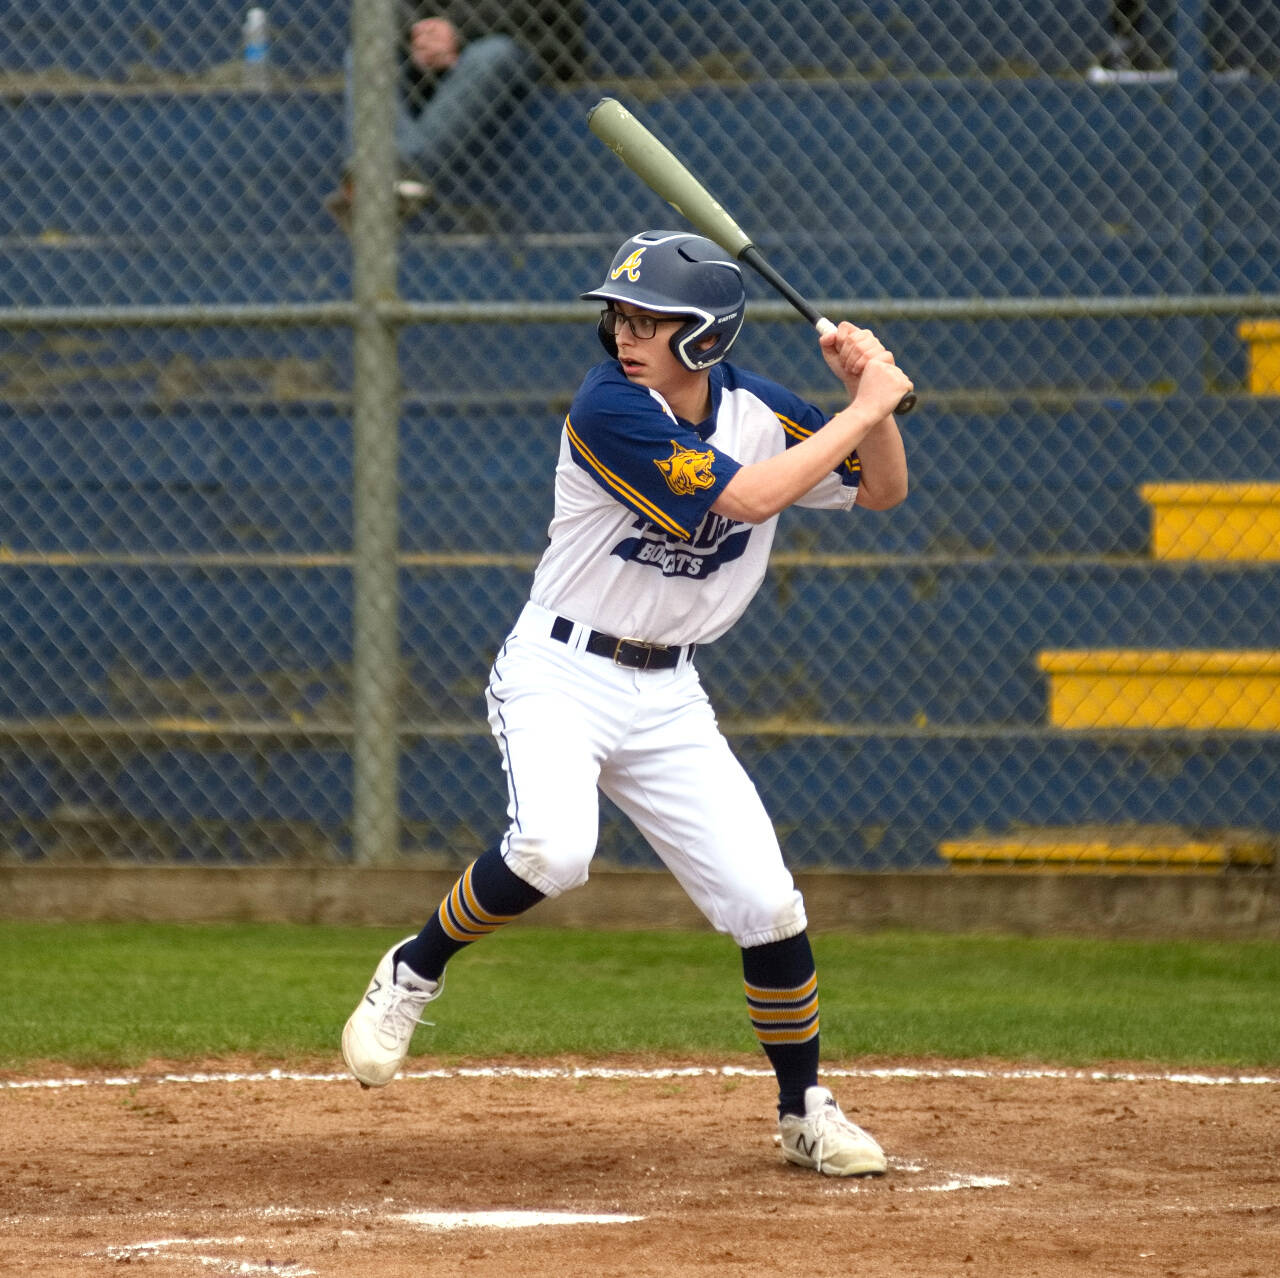 DAILY WORLD FILE PHOTO Aberdeen outfielder Luca Pisani had three hits in a 7-1 loss to Tumwater on Thursday in Tumwater.